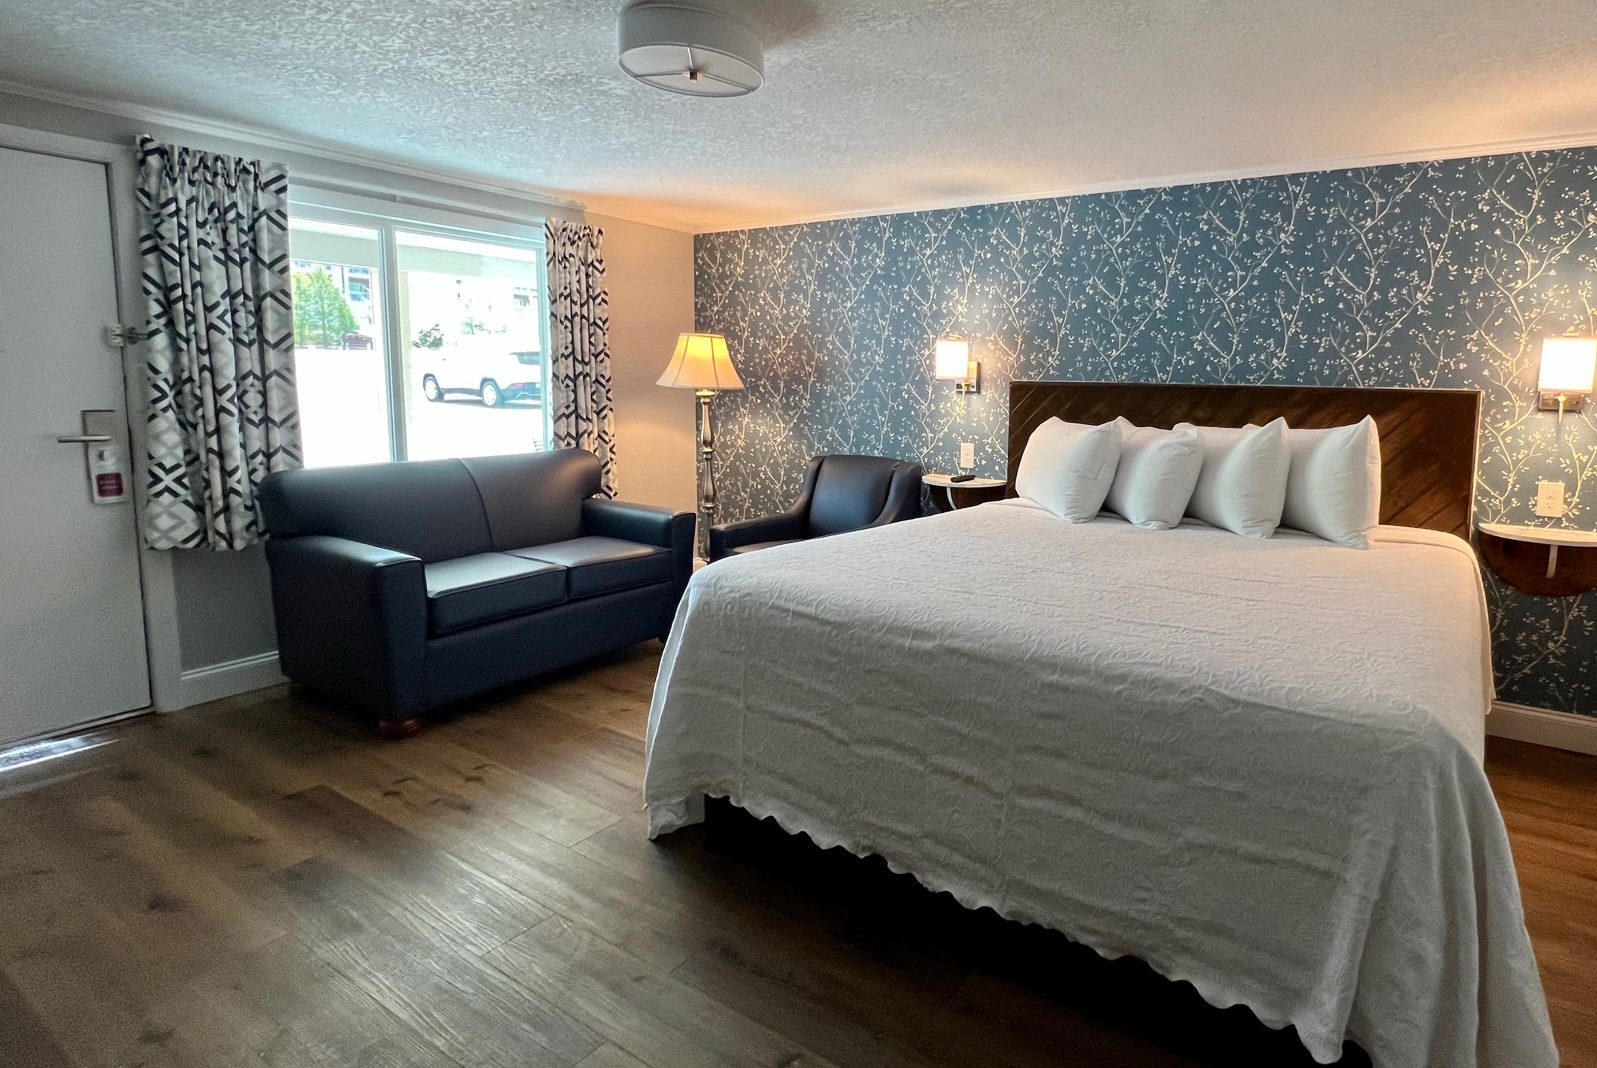 renovated deluxe single motel room with king size bed and blue wallpaper